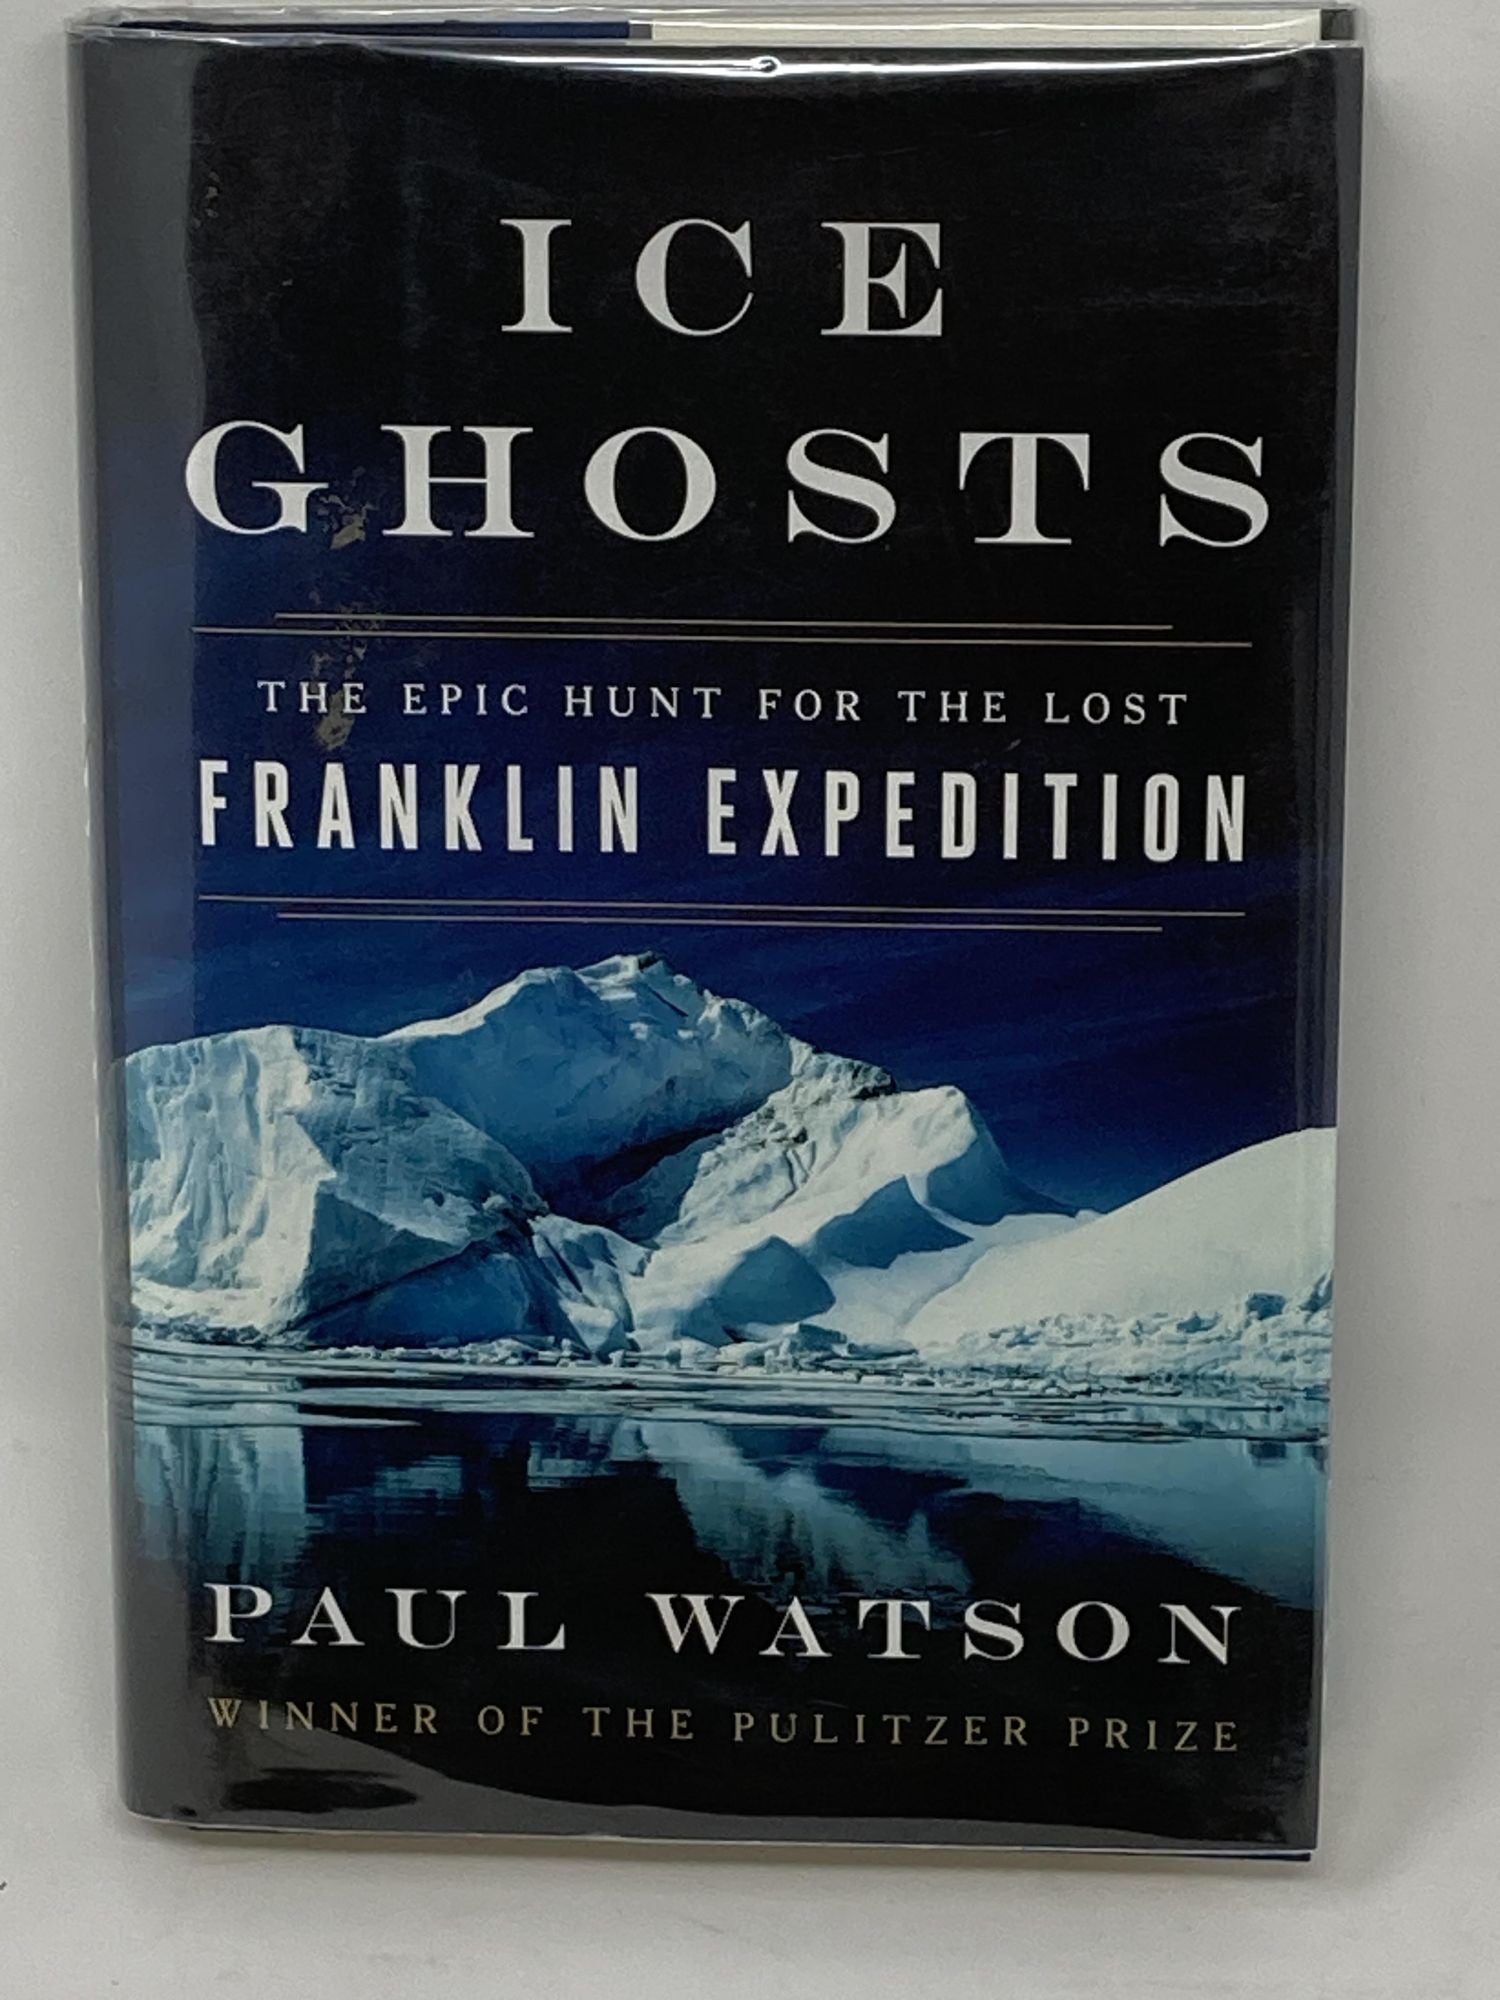 Watson, Paul - Ice Ghosts, the Epic Hunt for the Lost Franklin Expedition (Signed)